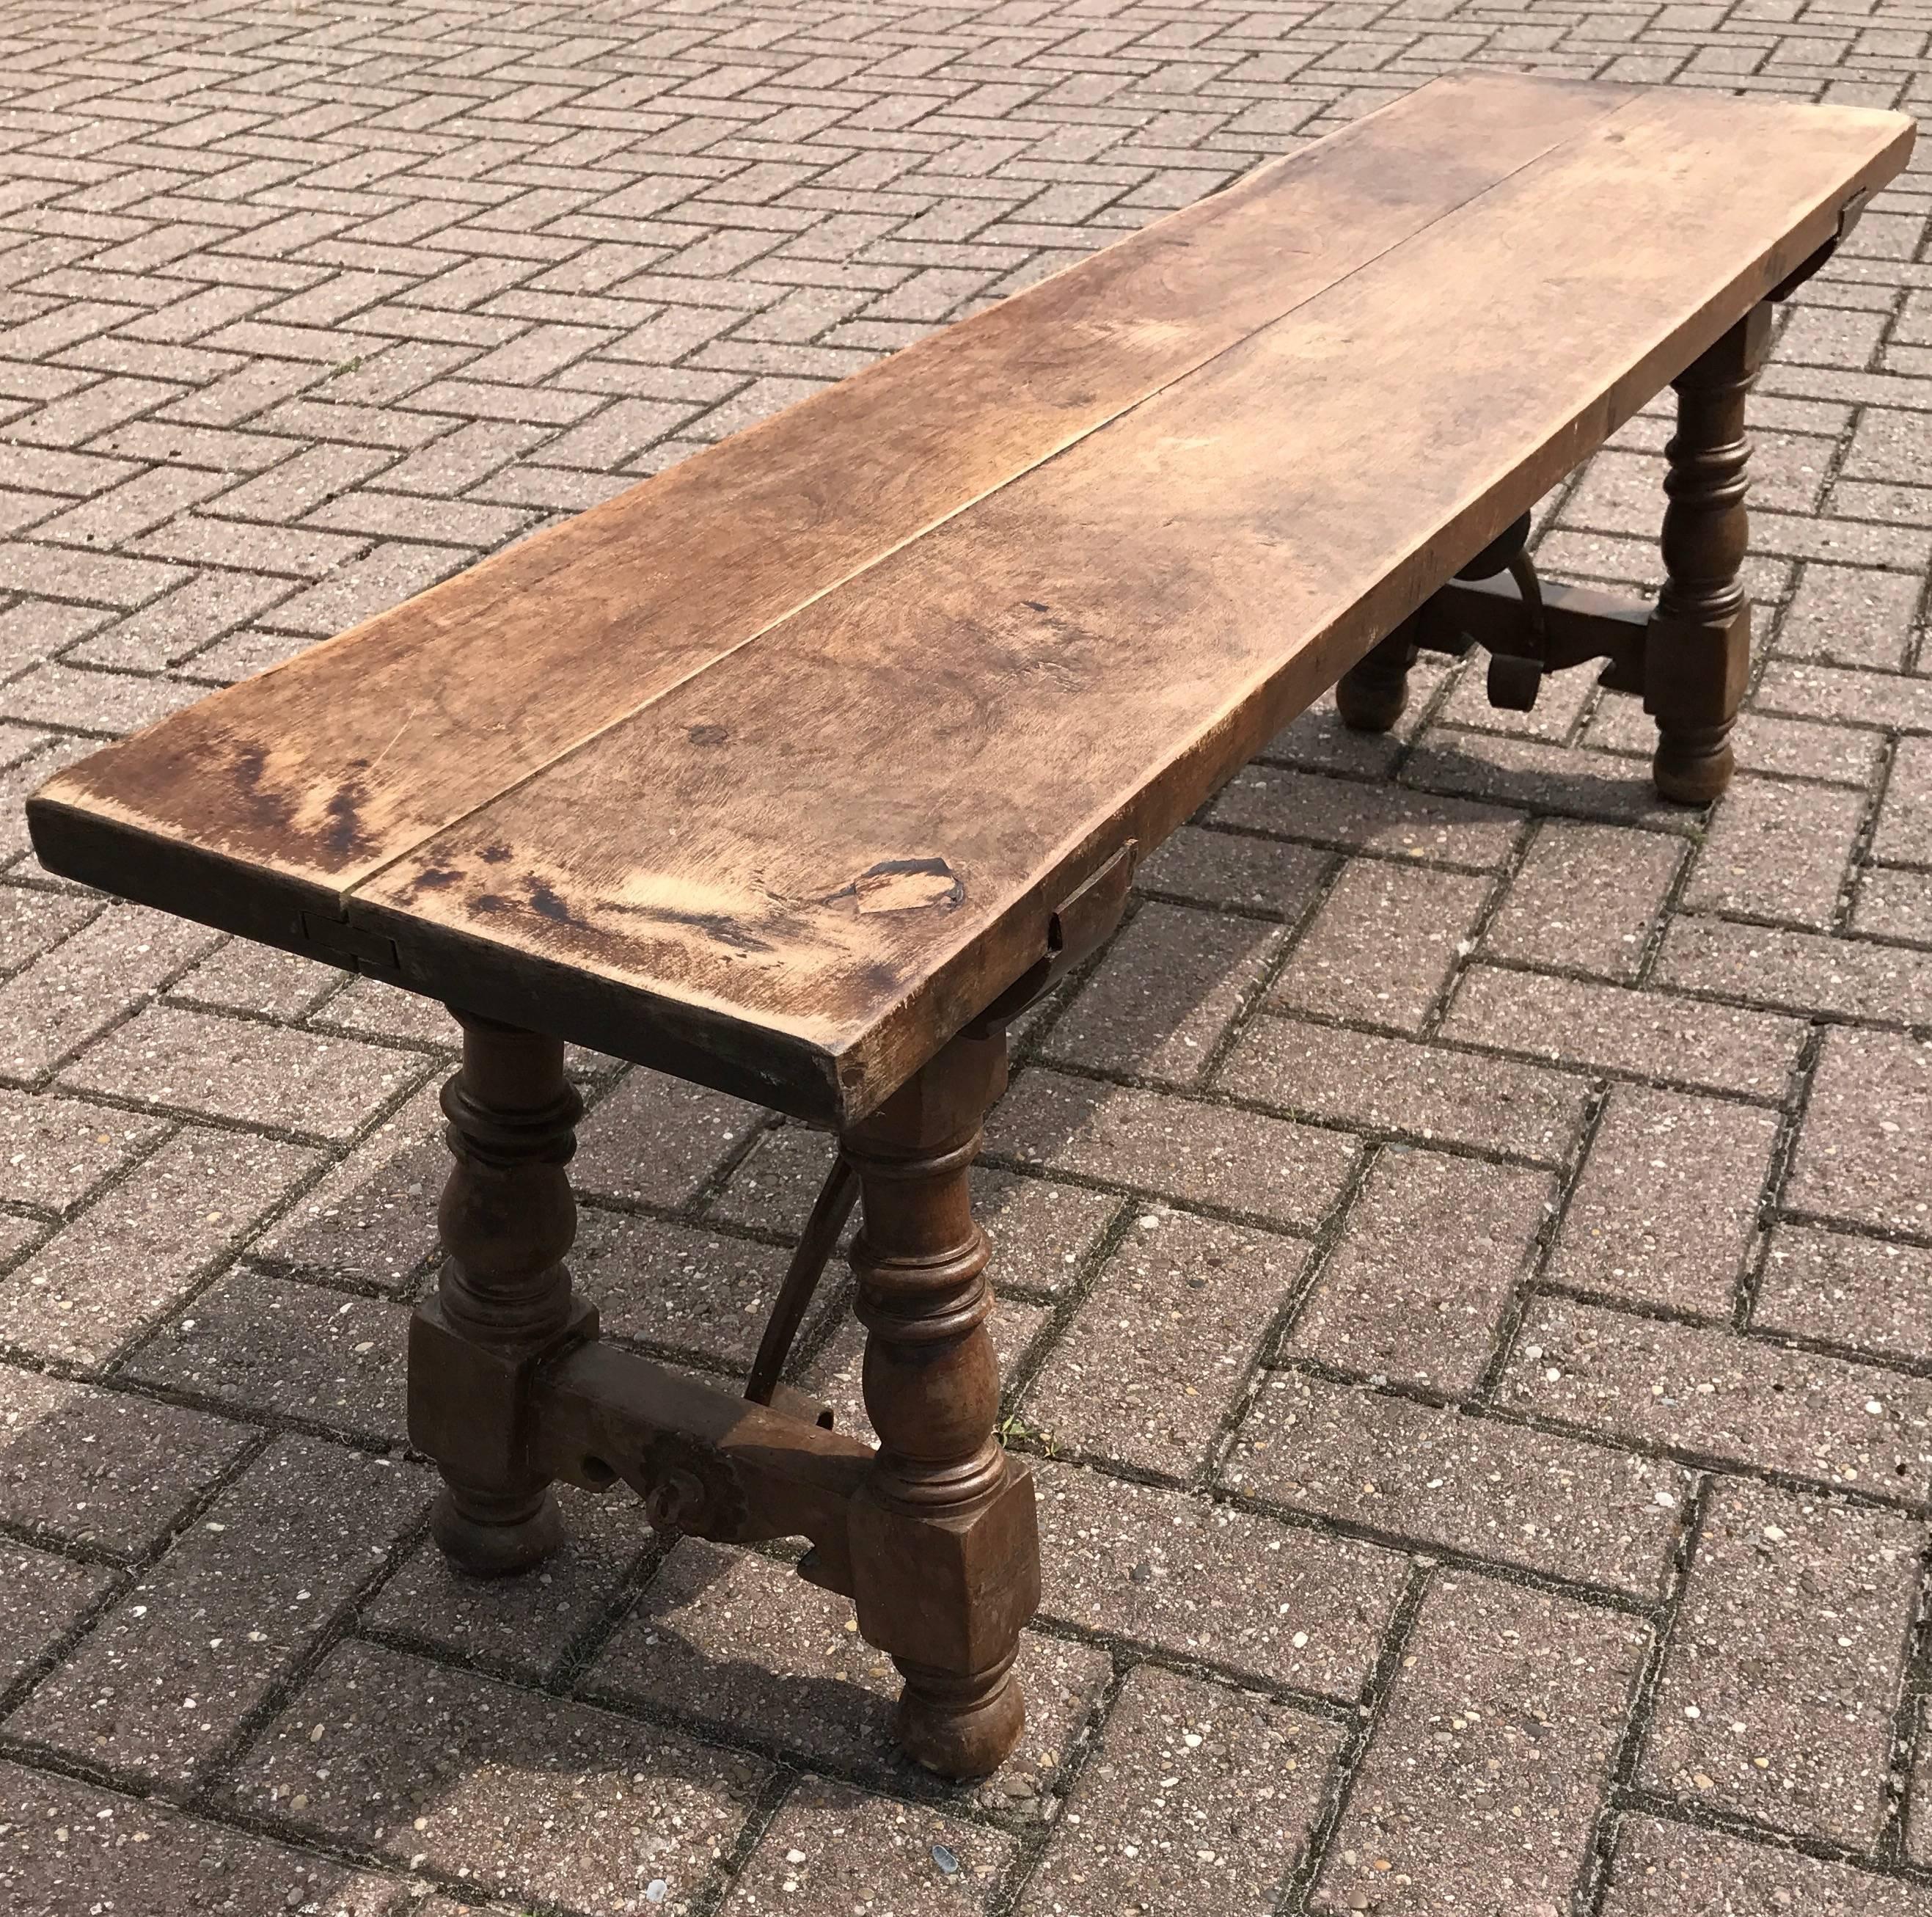 Sturdy, stylish and practical, antique Spanish bench.

This early twentieth century Spanish bench comes with a thick and strong wooden top. This bench is raised on two hand-turned wooden legs and both are connected to the seat by exquisitely curved